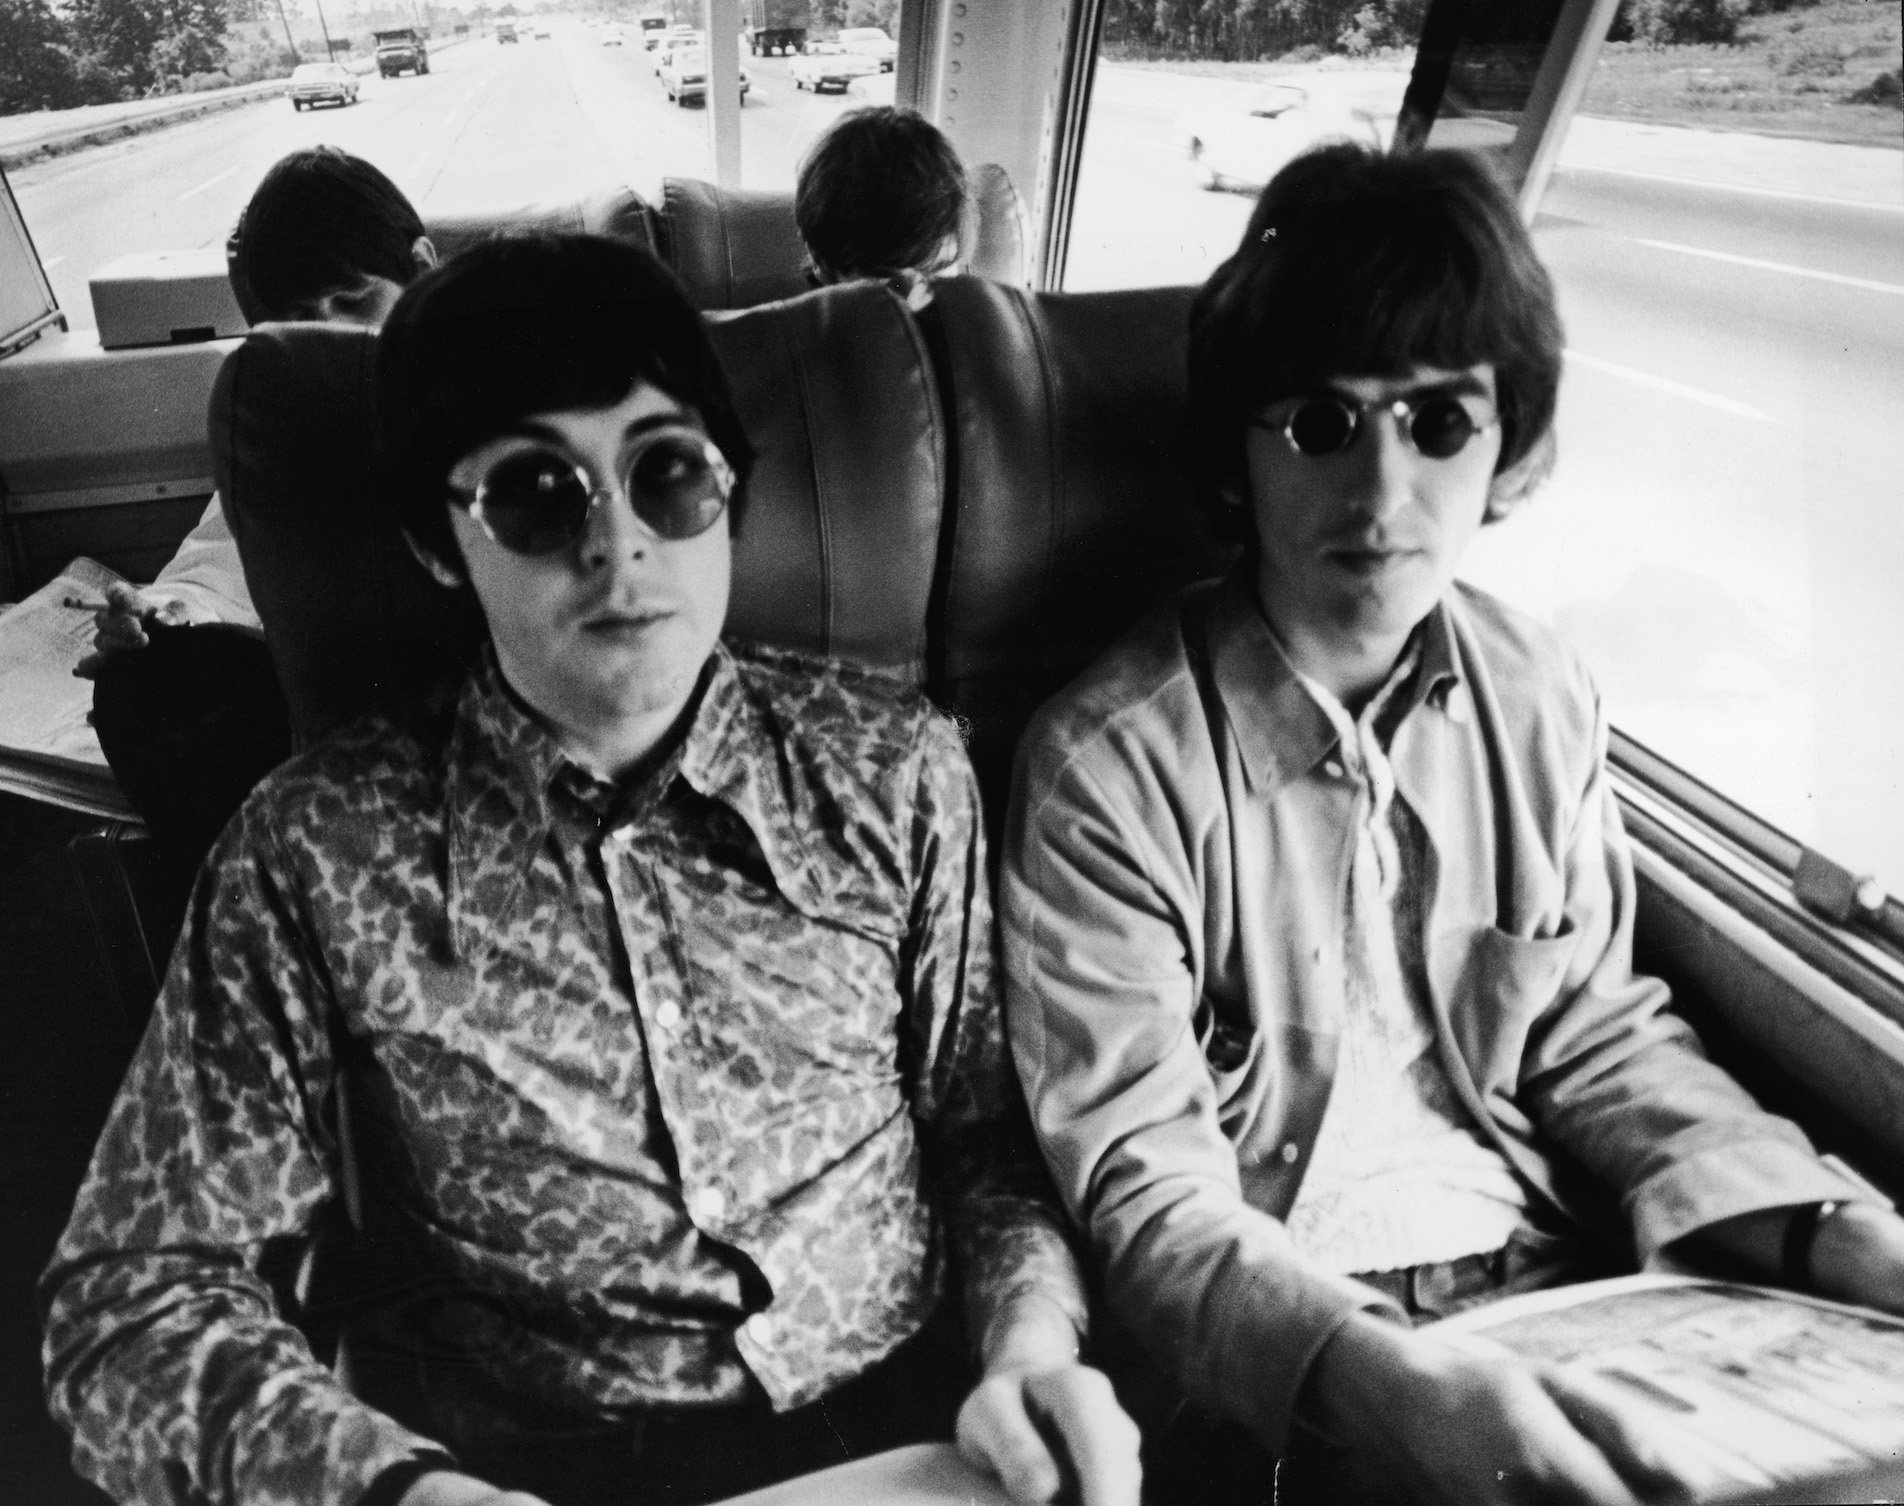 Paul McCartney and George Harrison on The Beatles' tour bus